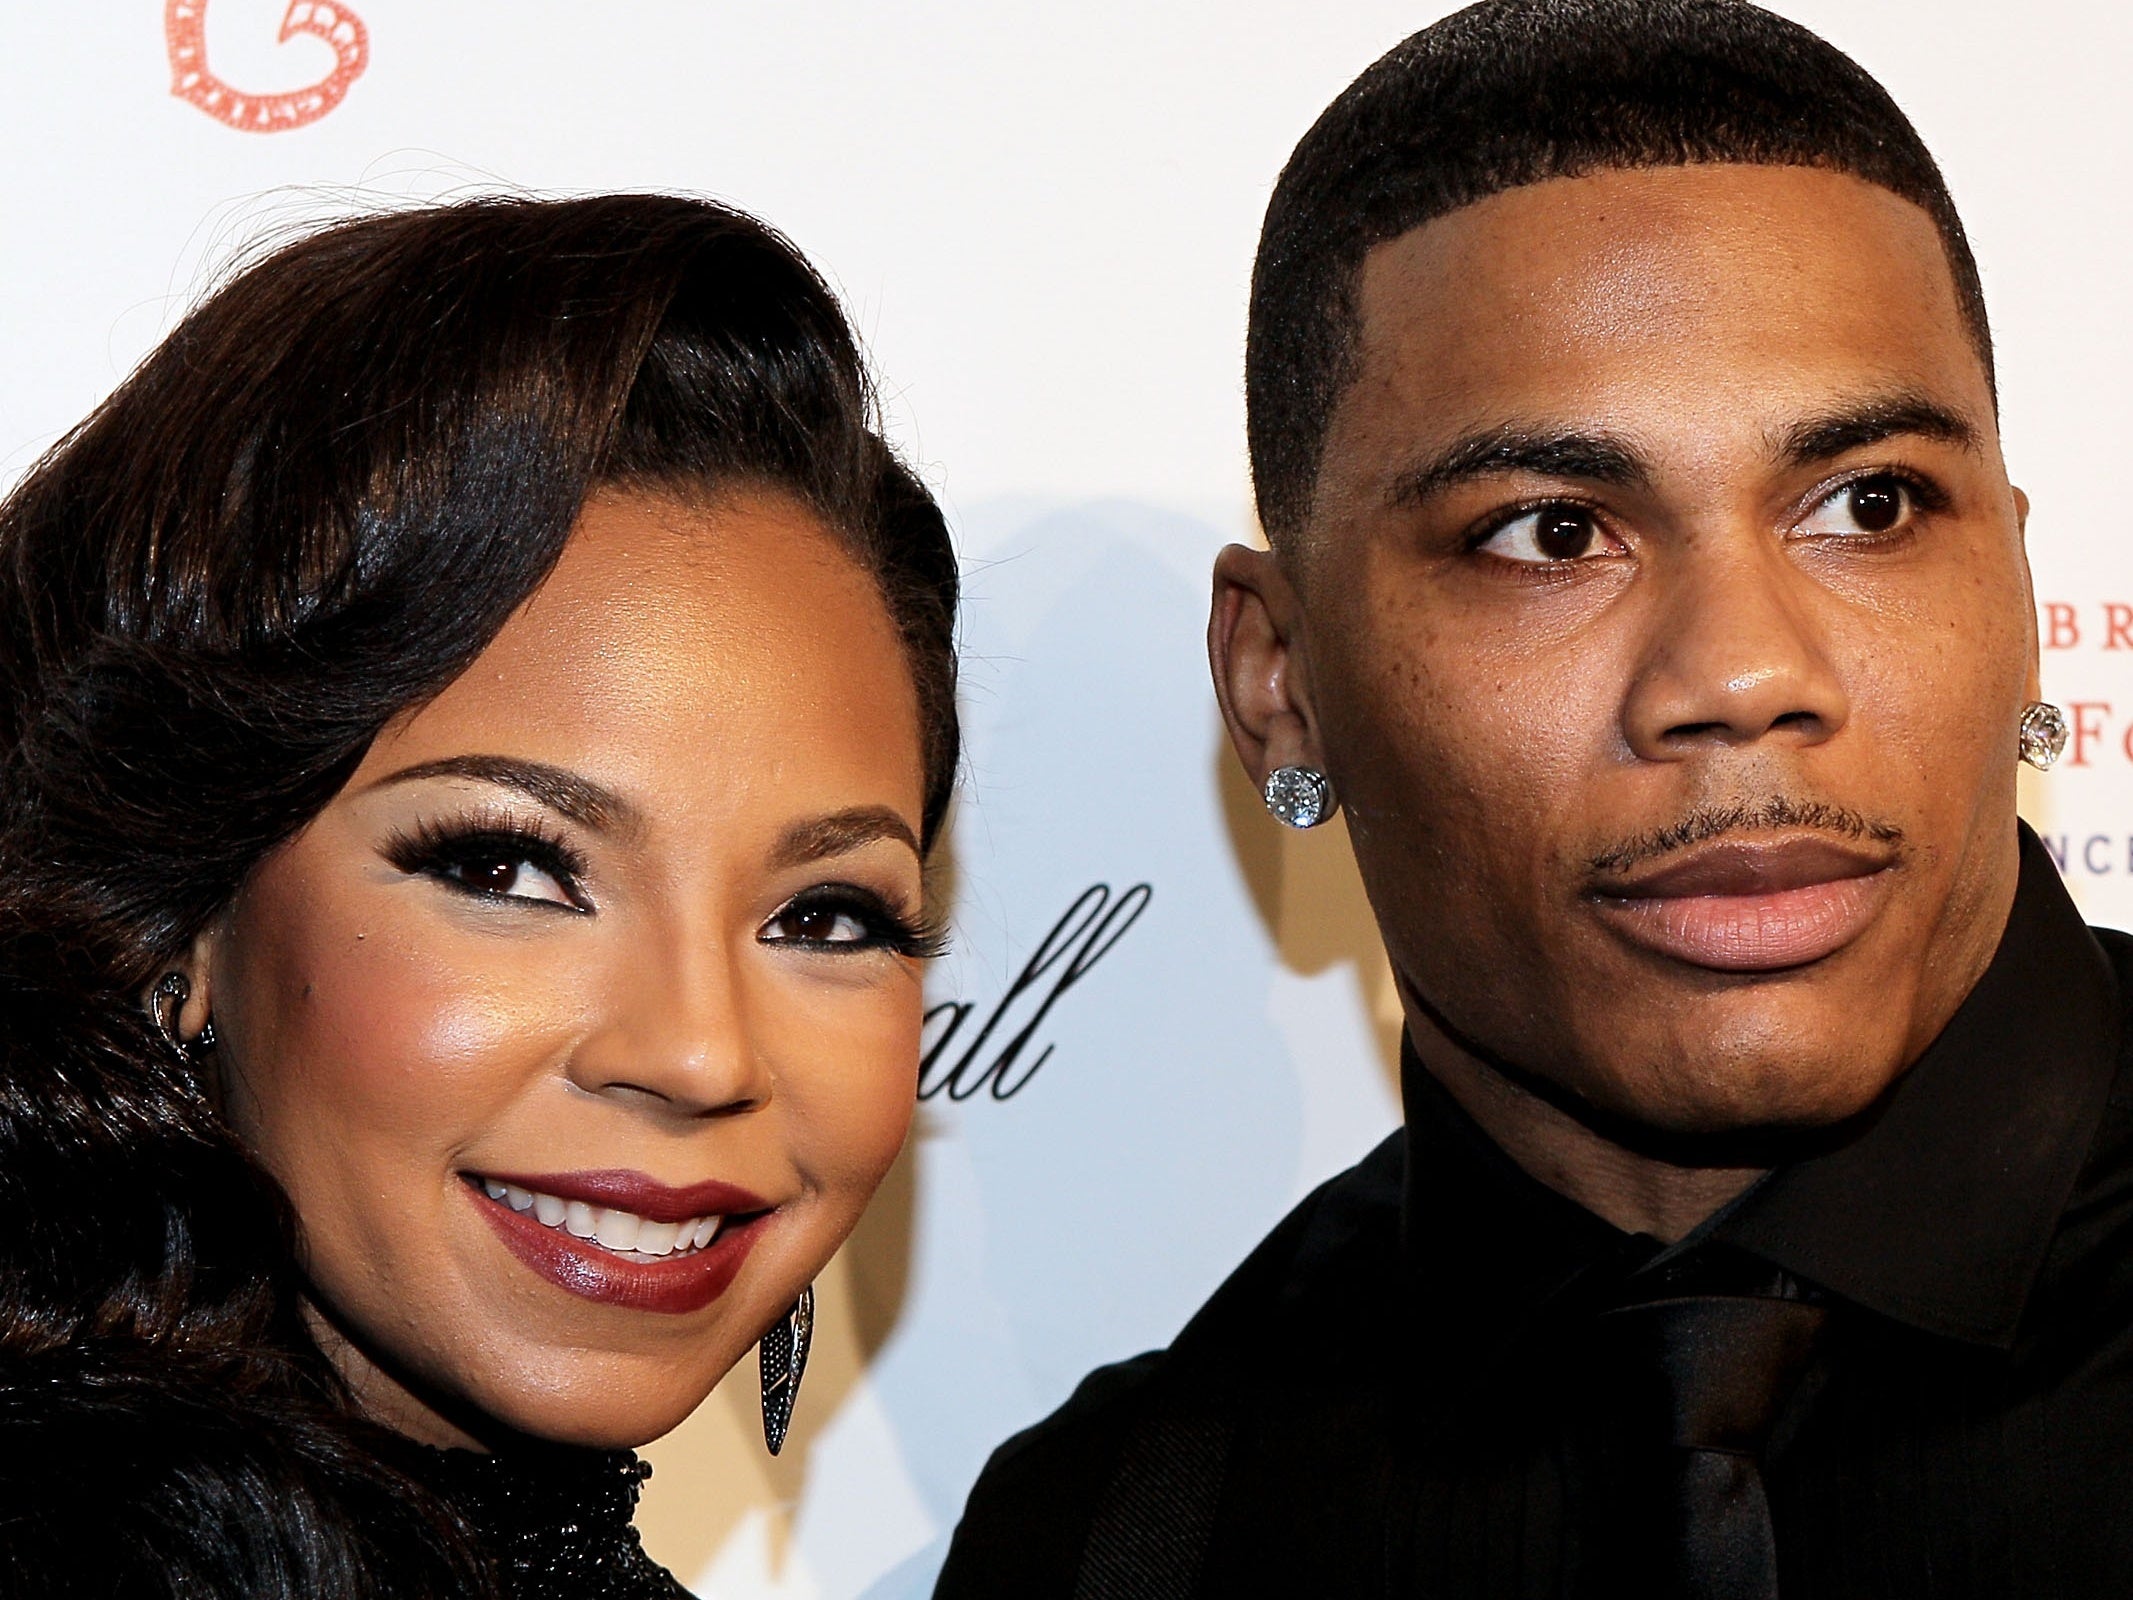 Ashanti Says Her And Nelly Are 'In A Better Place’ Following Their Recent Performance 